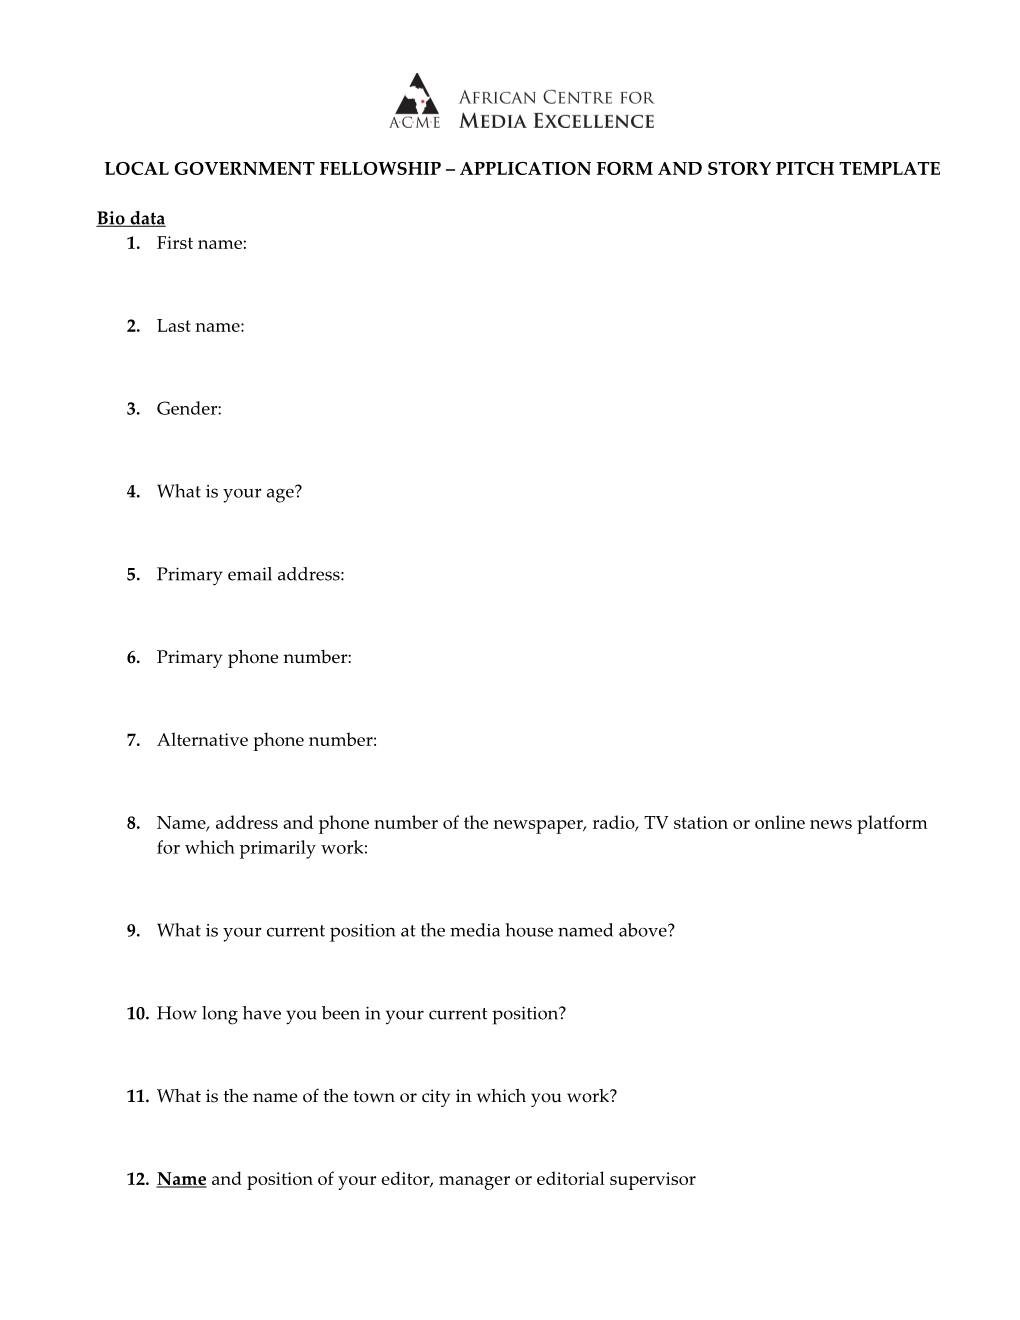 Local Government Fellowship Application Form and Story Pitch Template